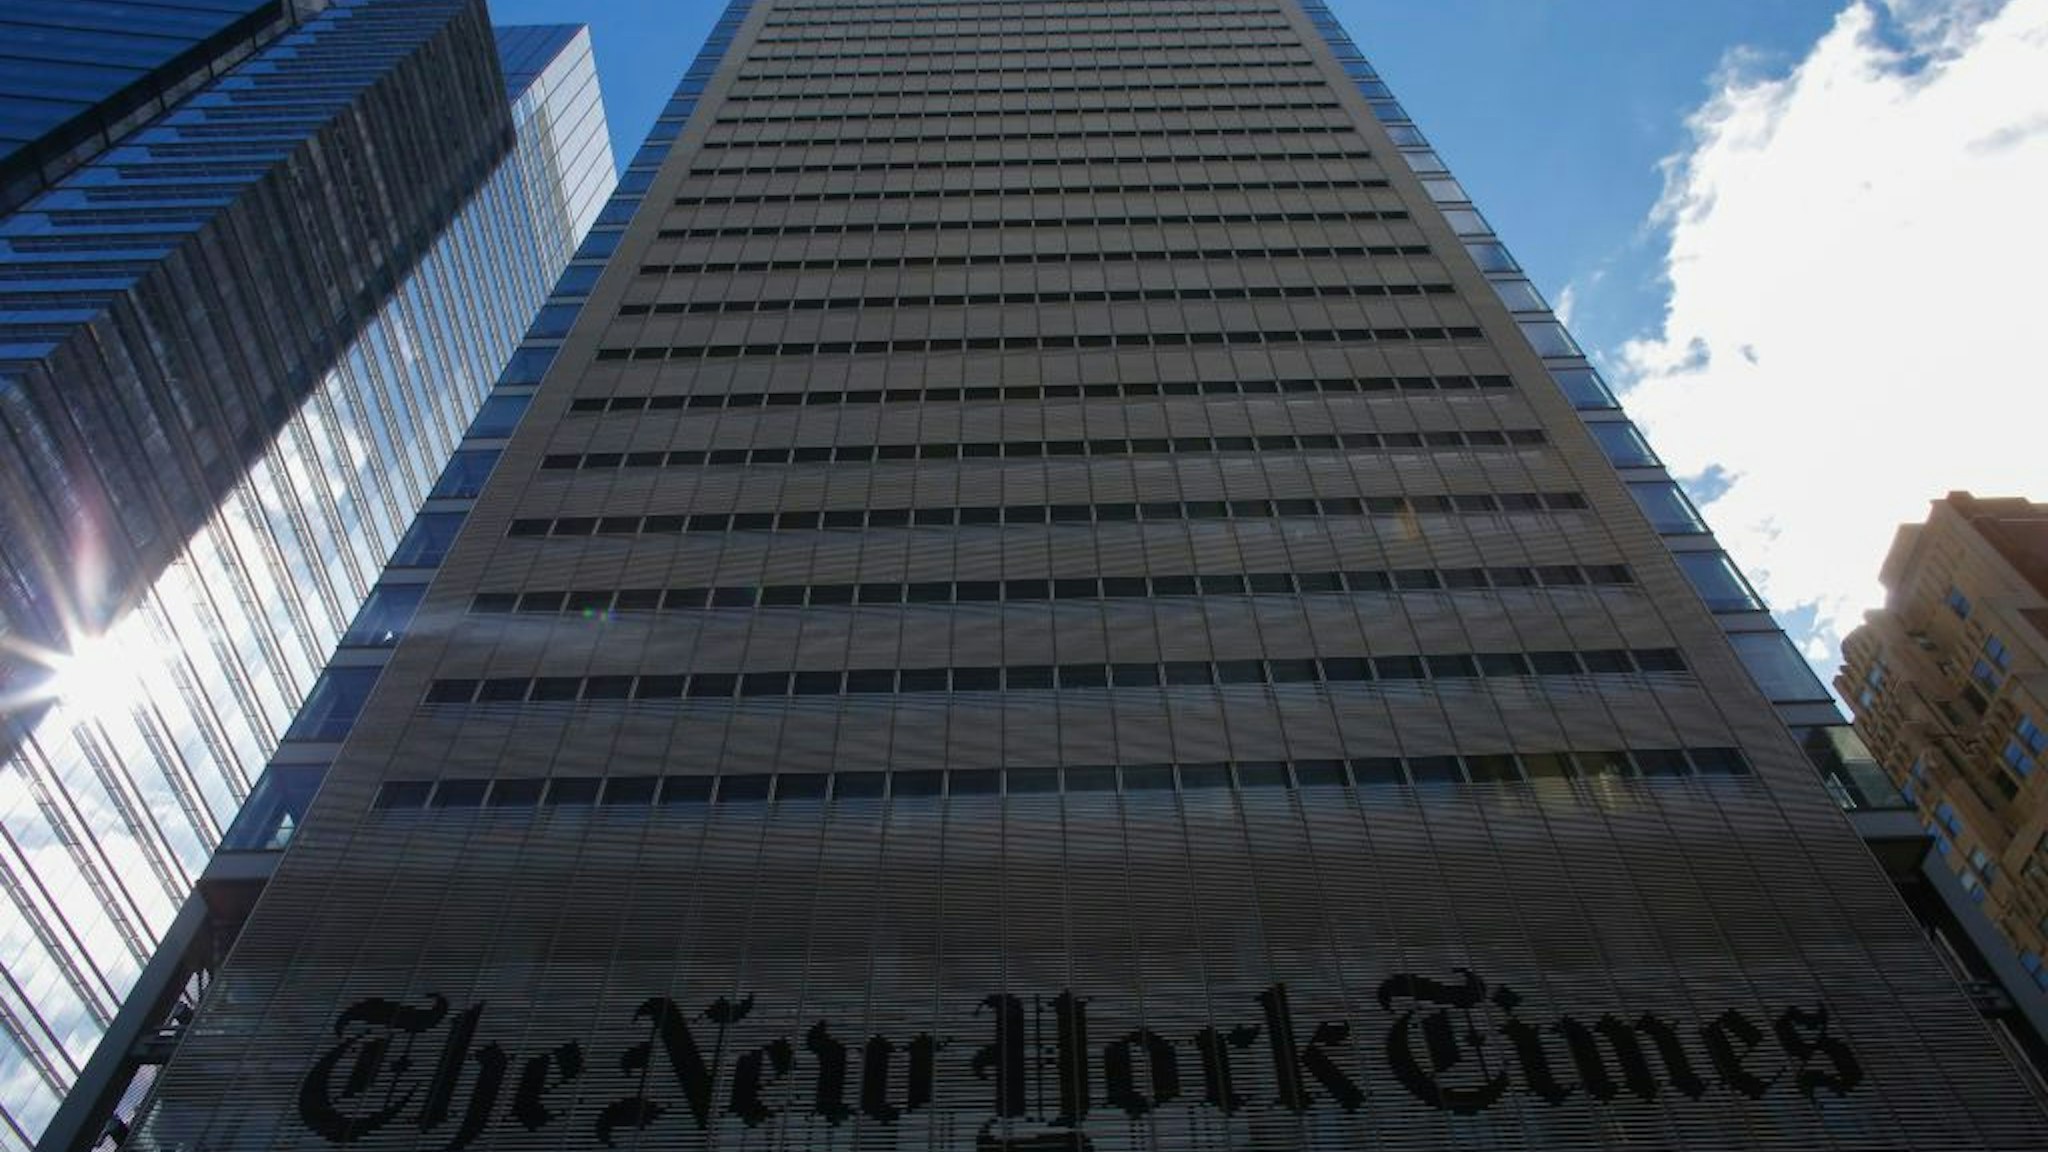 The New York Times Building is seen on February 26, 2017 in New York.